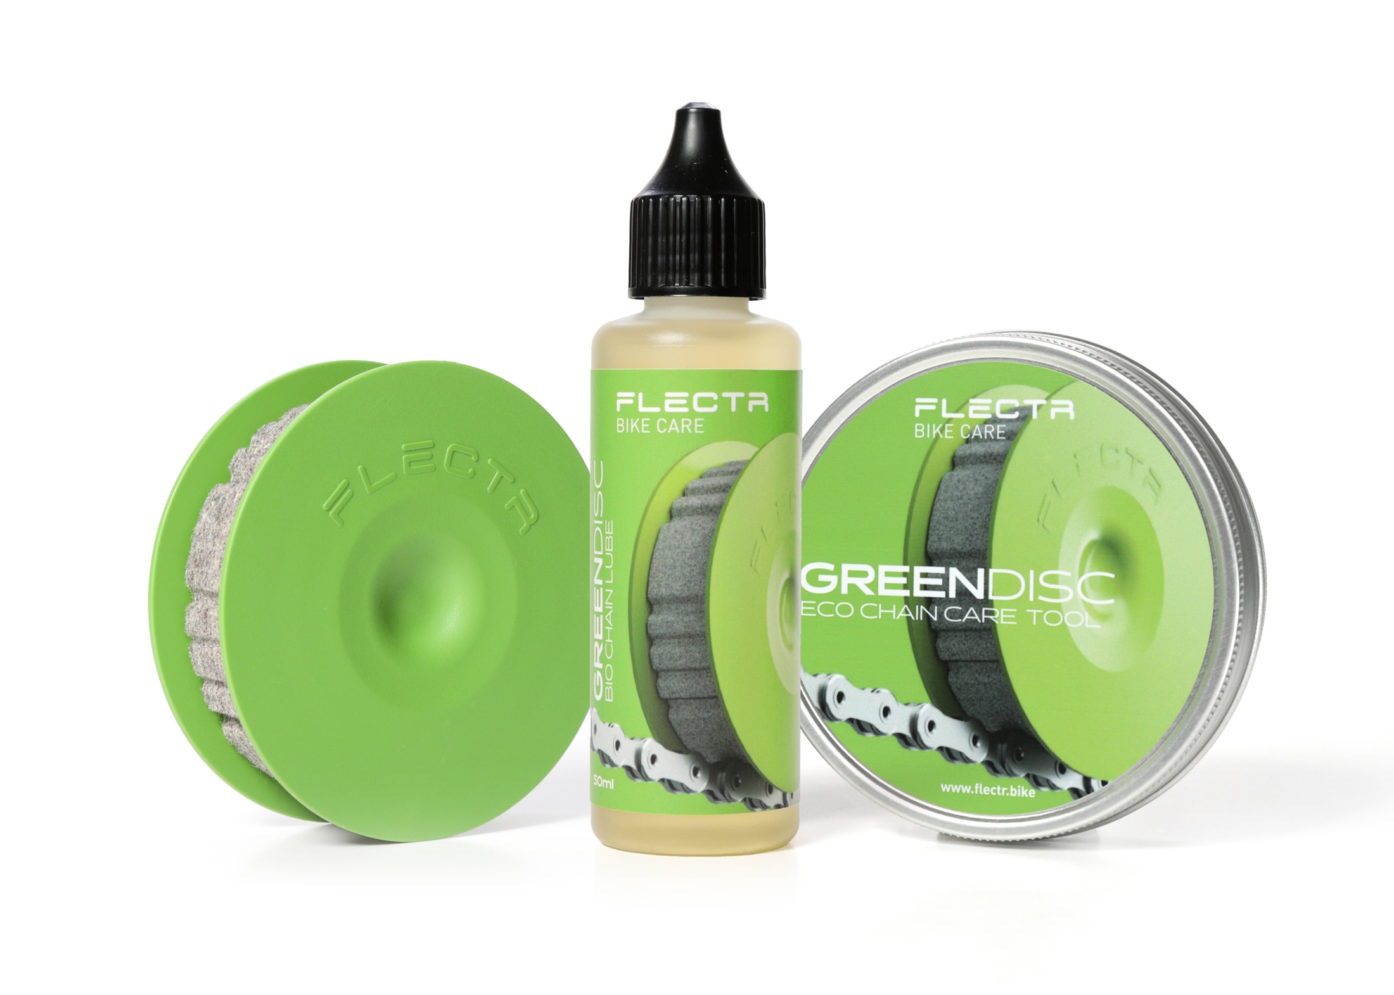 What's in the box? The green disc chain care tool comes with a refill bottle of lubricant.